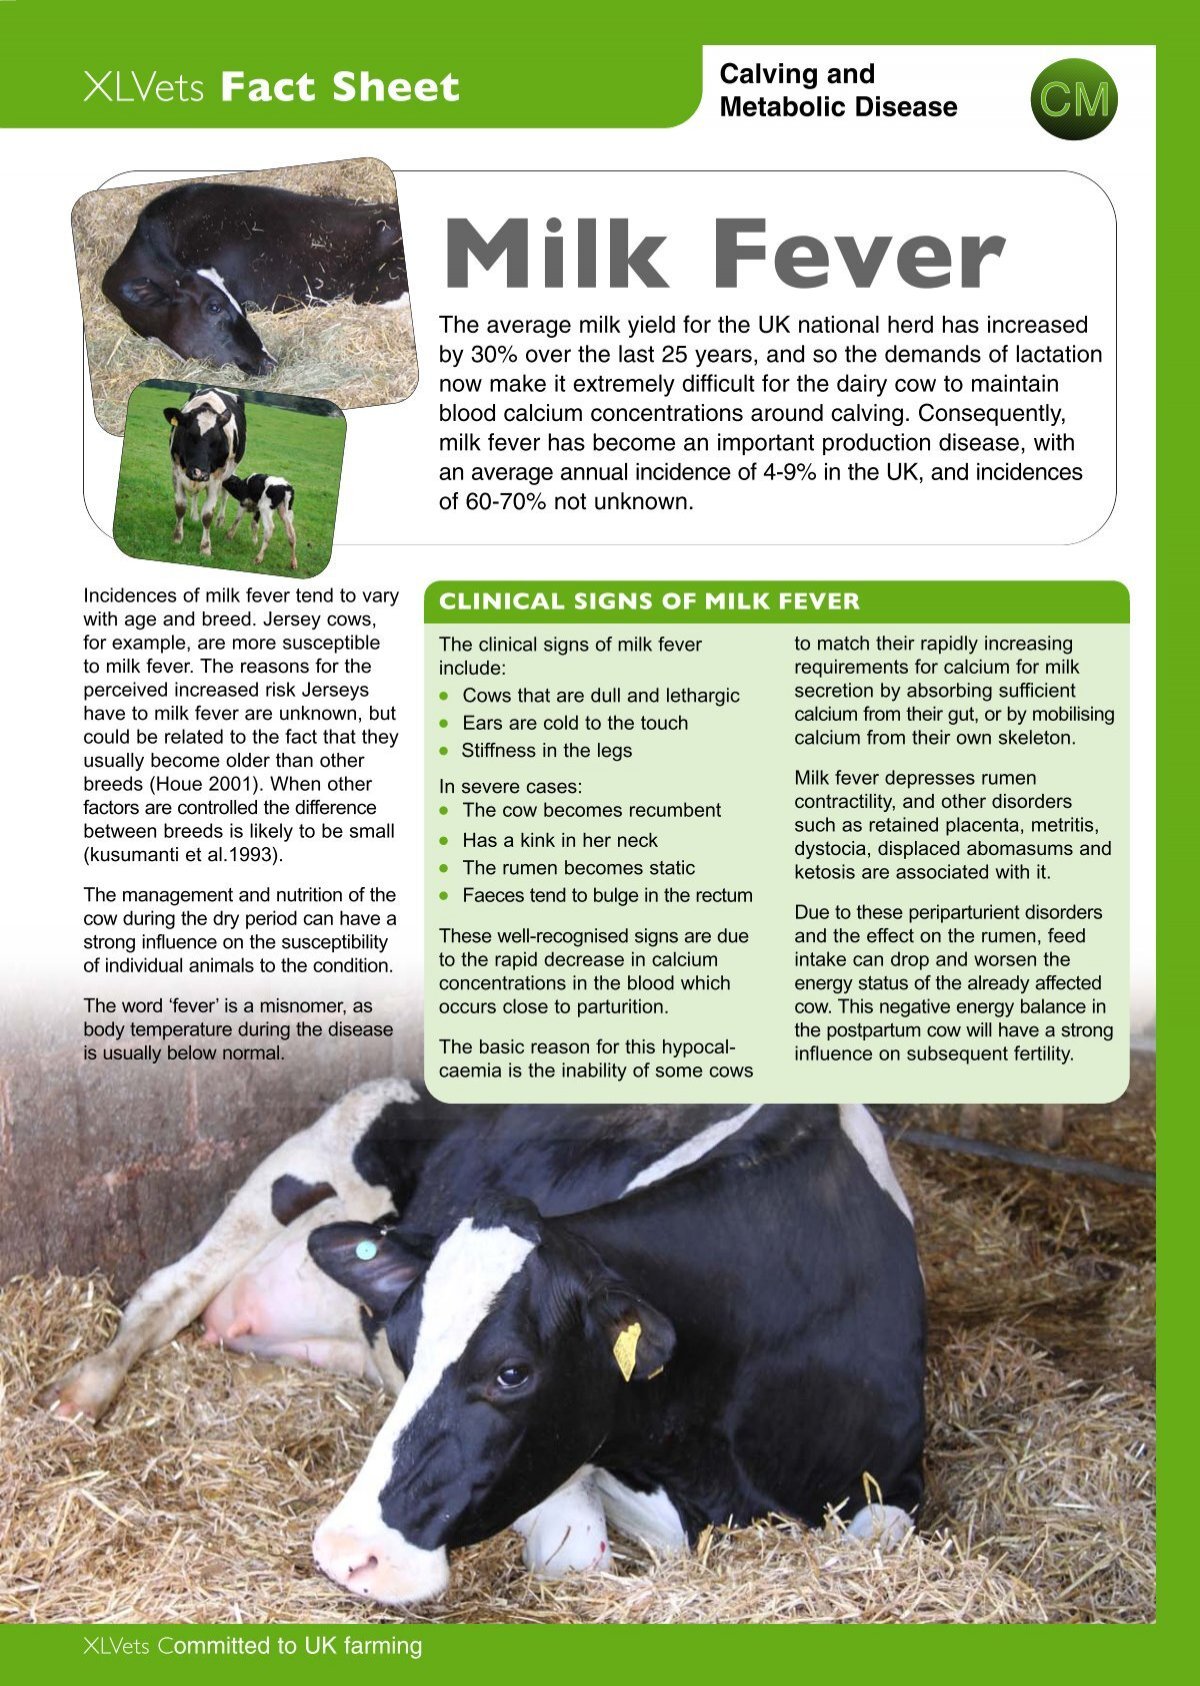 Fight Milk Fever in Cows with this Winning Combo - GENEX